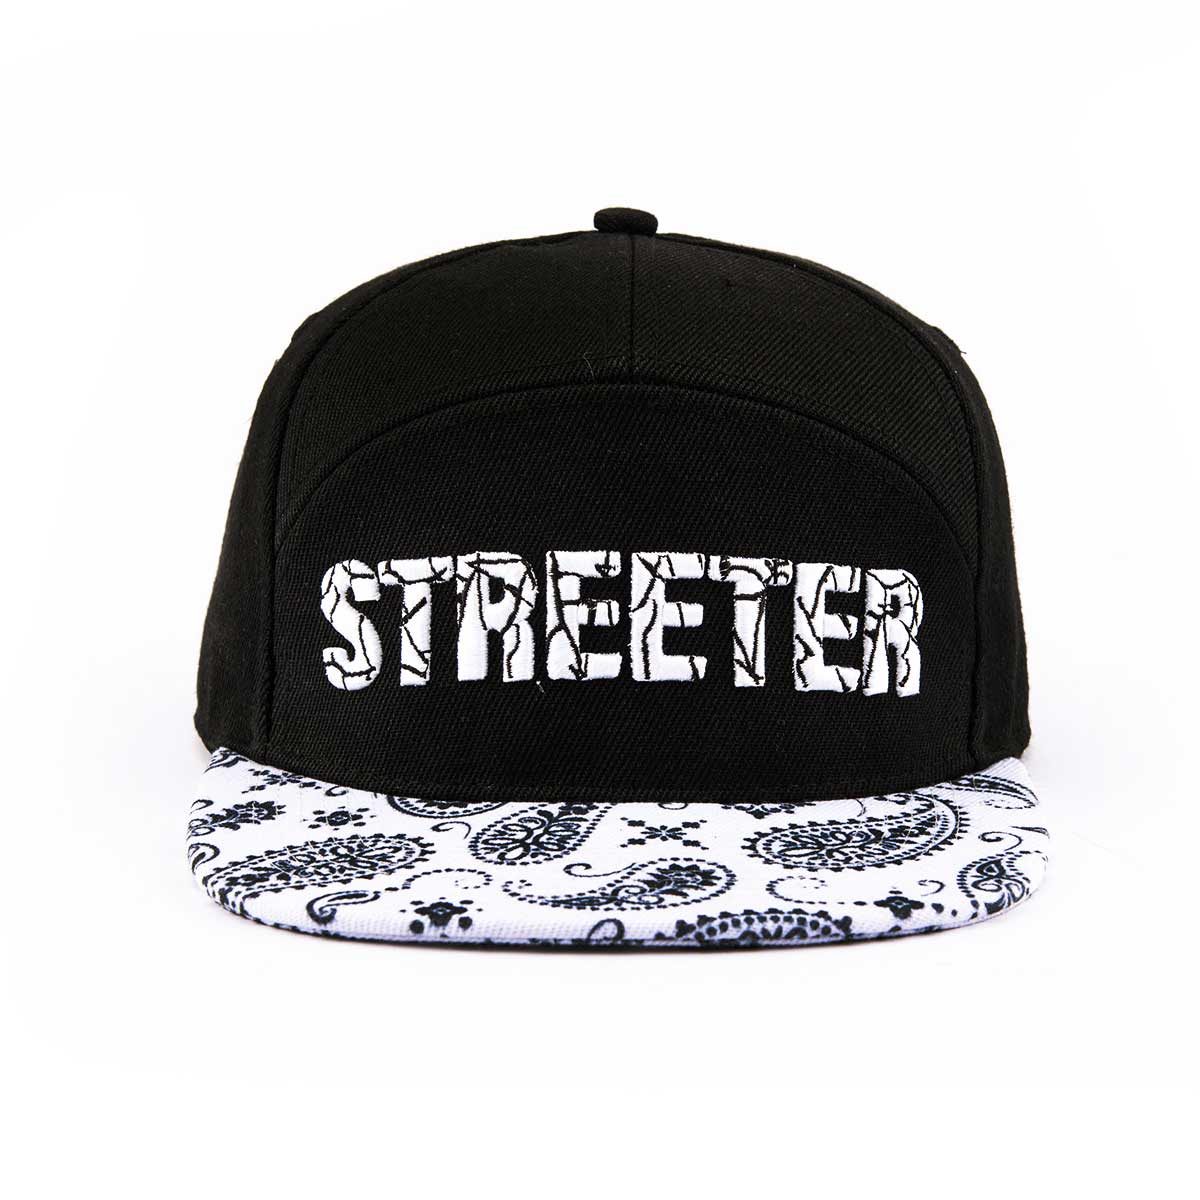 Streeter-casual-black-and-white-snapback-hats-for-women-and-men-KN2102012